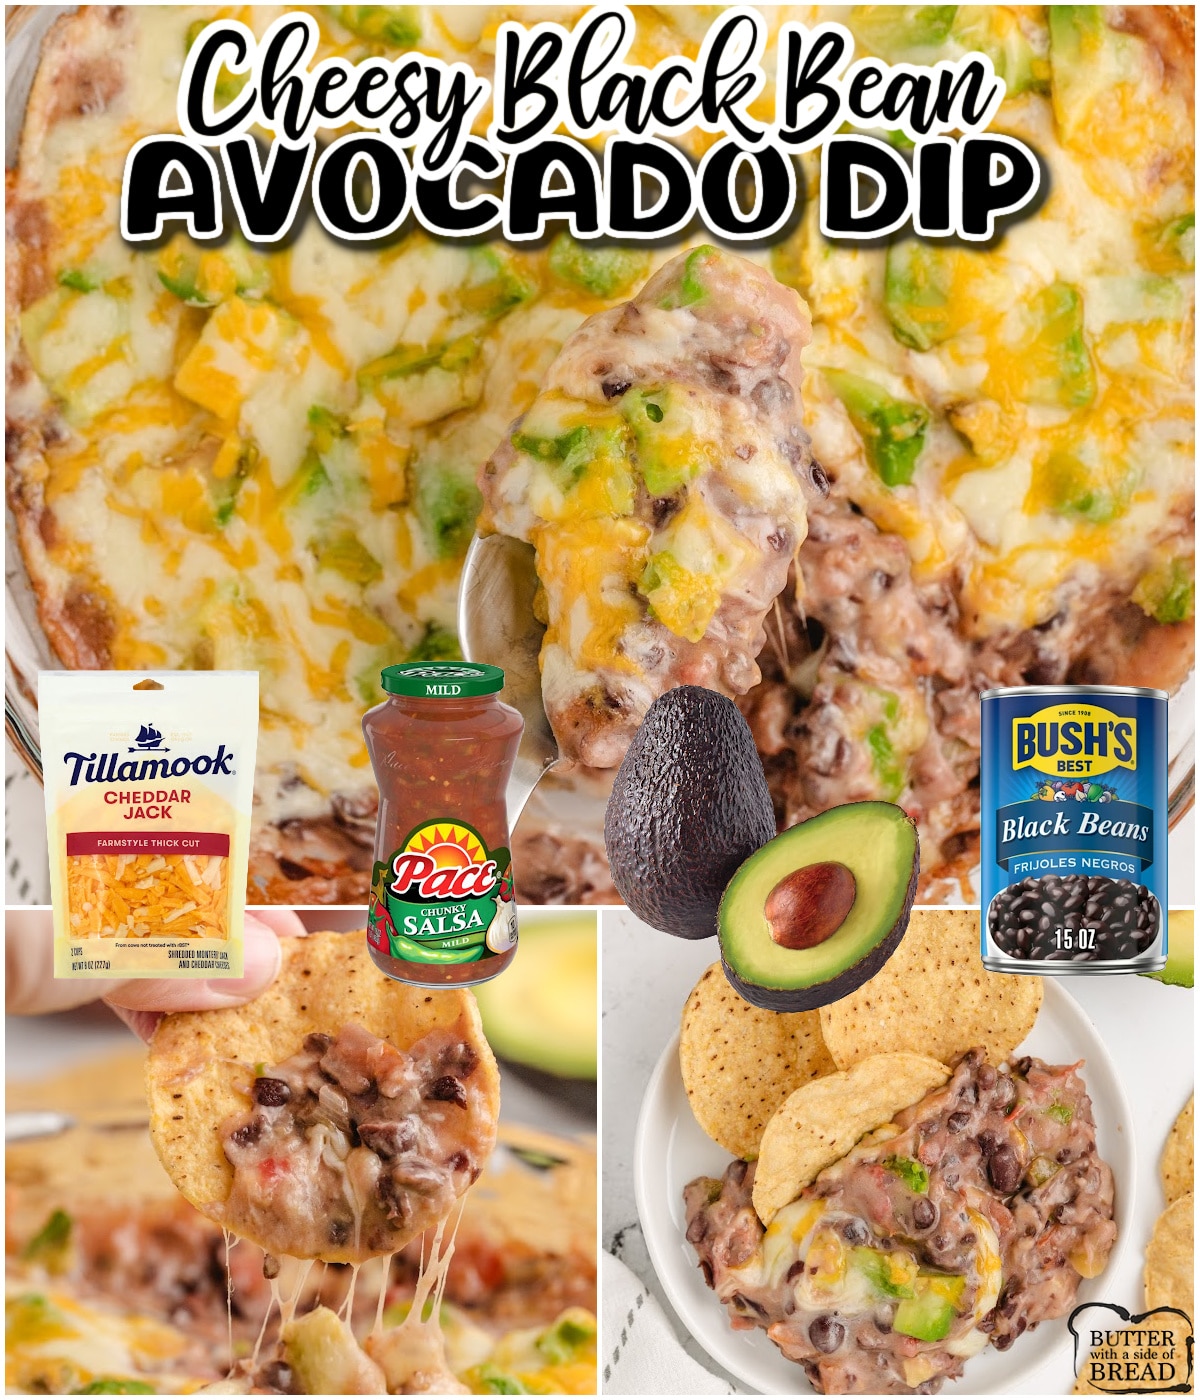 Cheesy Black Bean Avocado Dip is so delicious and is made with only 4 simple ingredients, making it the perfect appetizer for any party! This avocado and black bean dip is not only easy to make but the flavor combination is incredible too. 